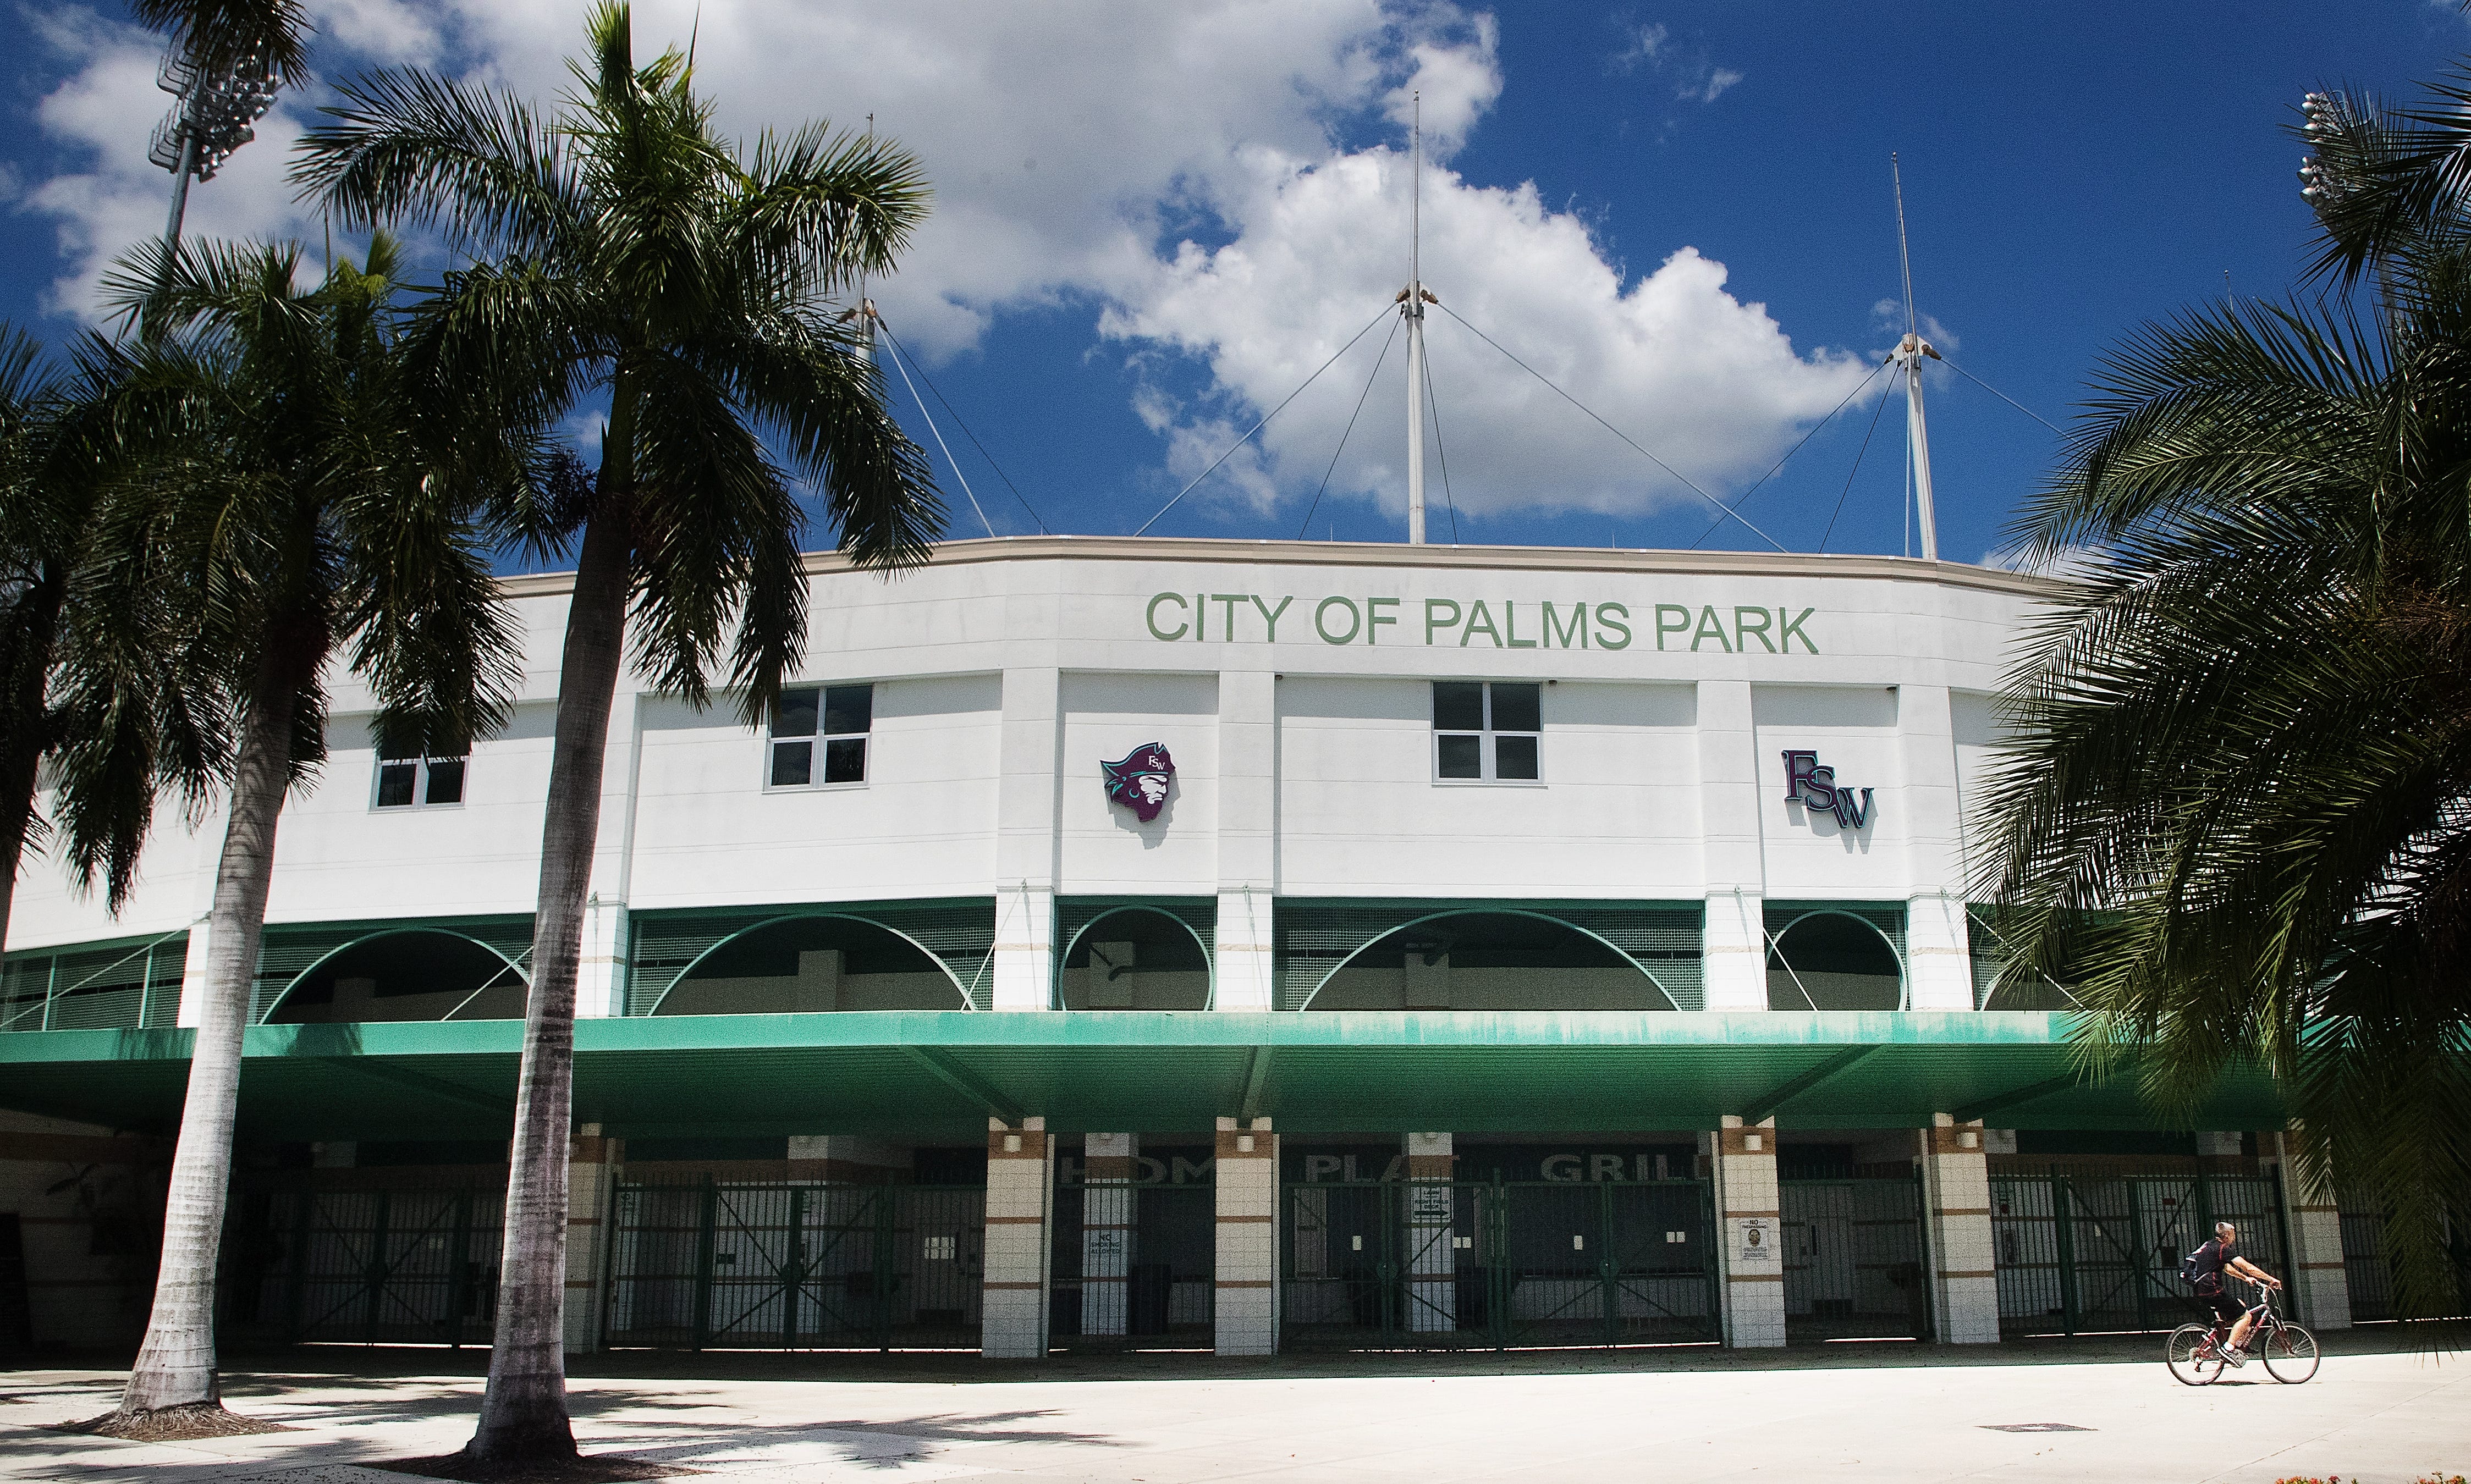 Fort Myers asks Lee County to tear down City of Palms Park